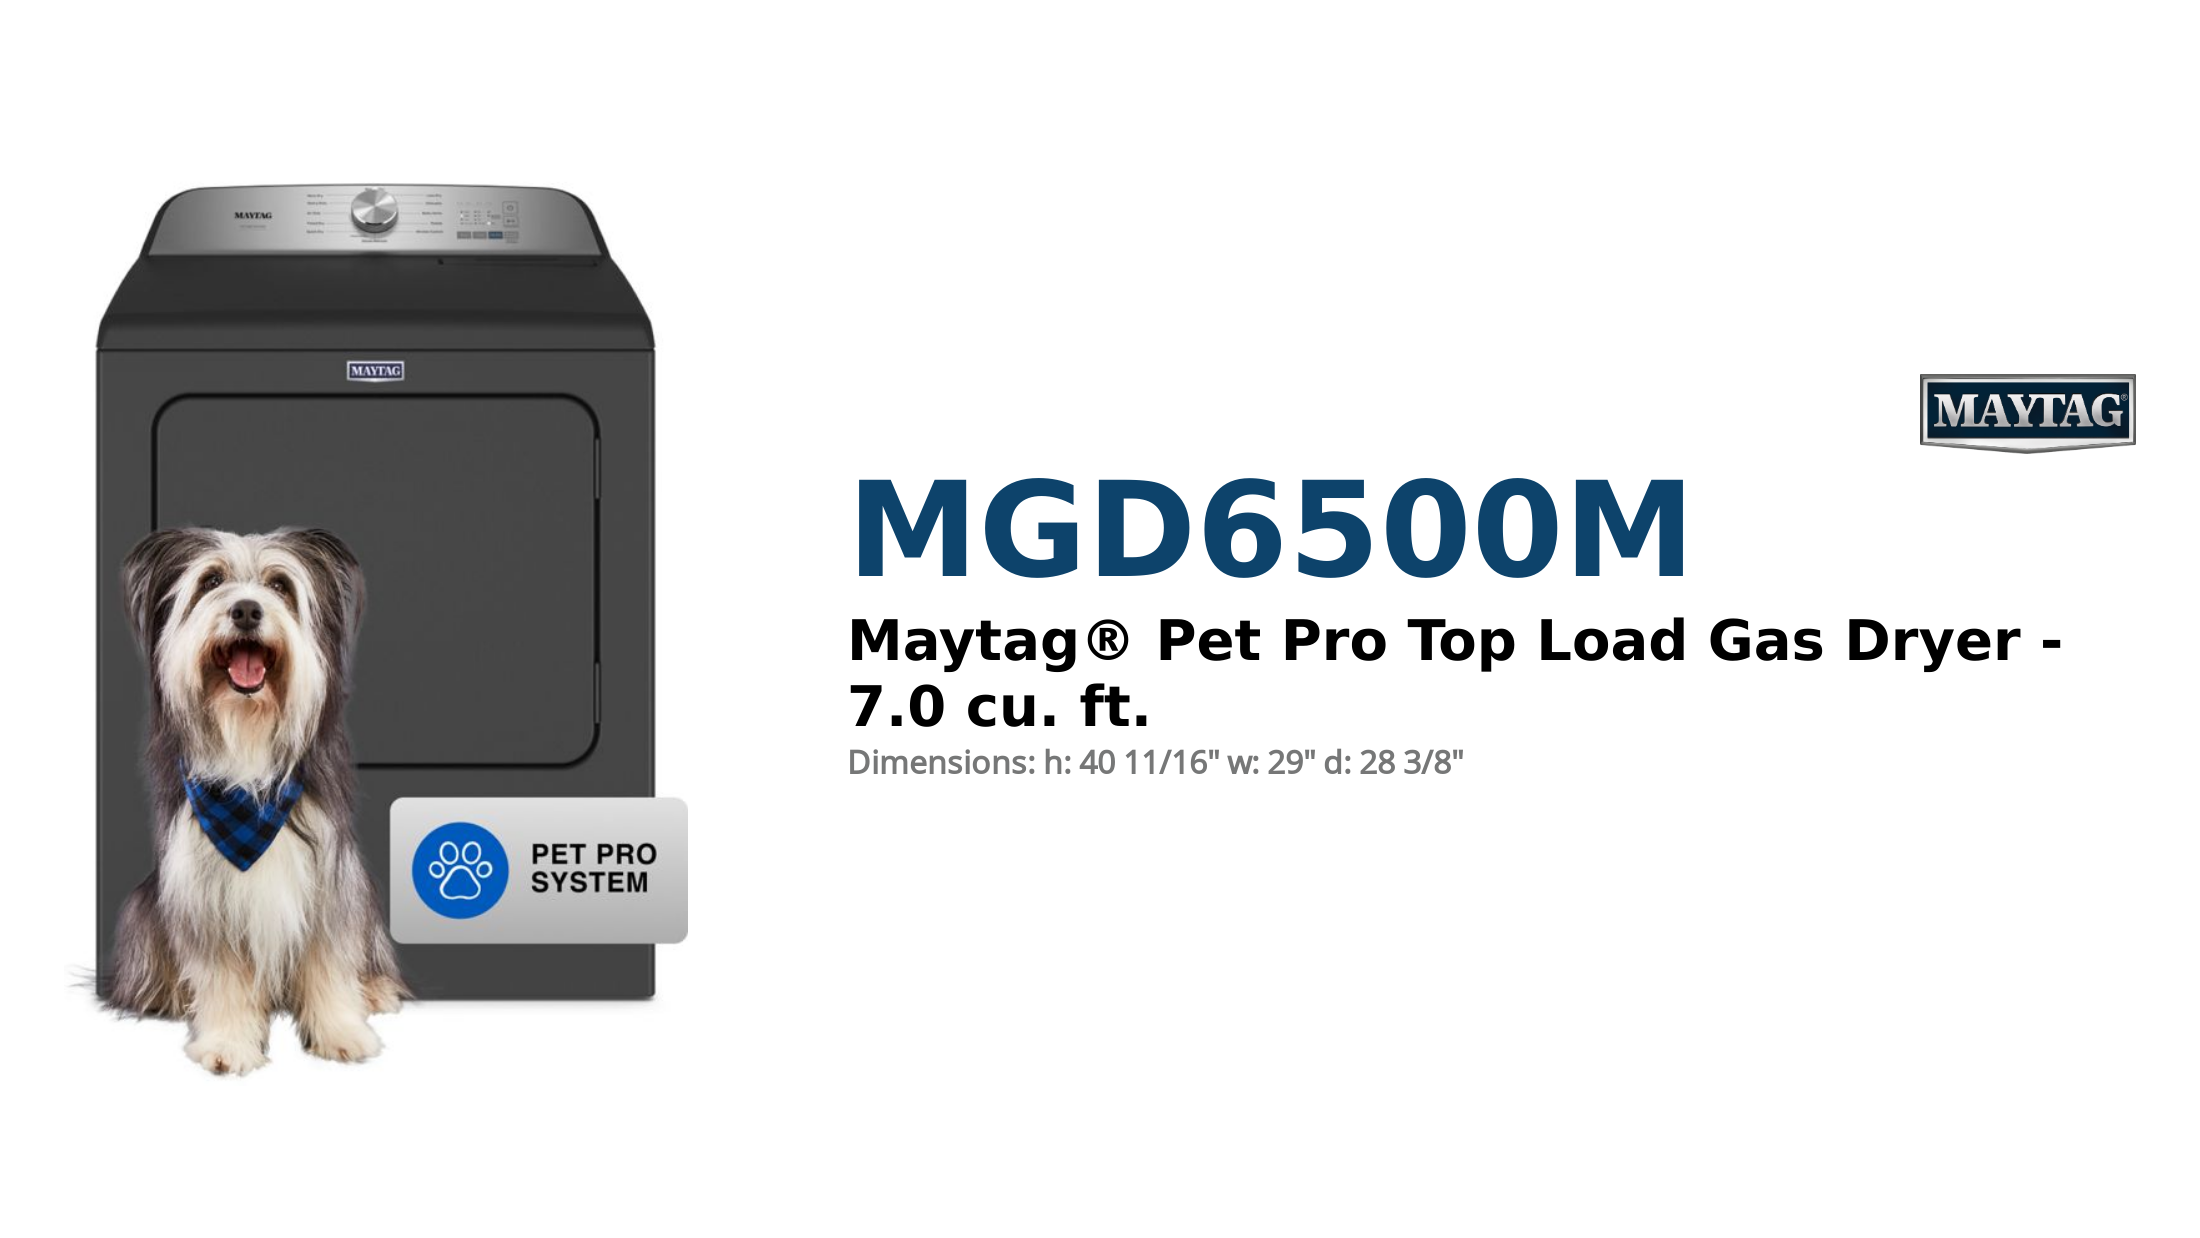 Maytag® Pet Pro Top Load Gas Dryer - 7.0 cu. ft.